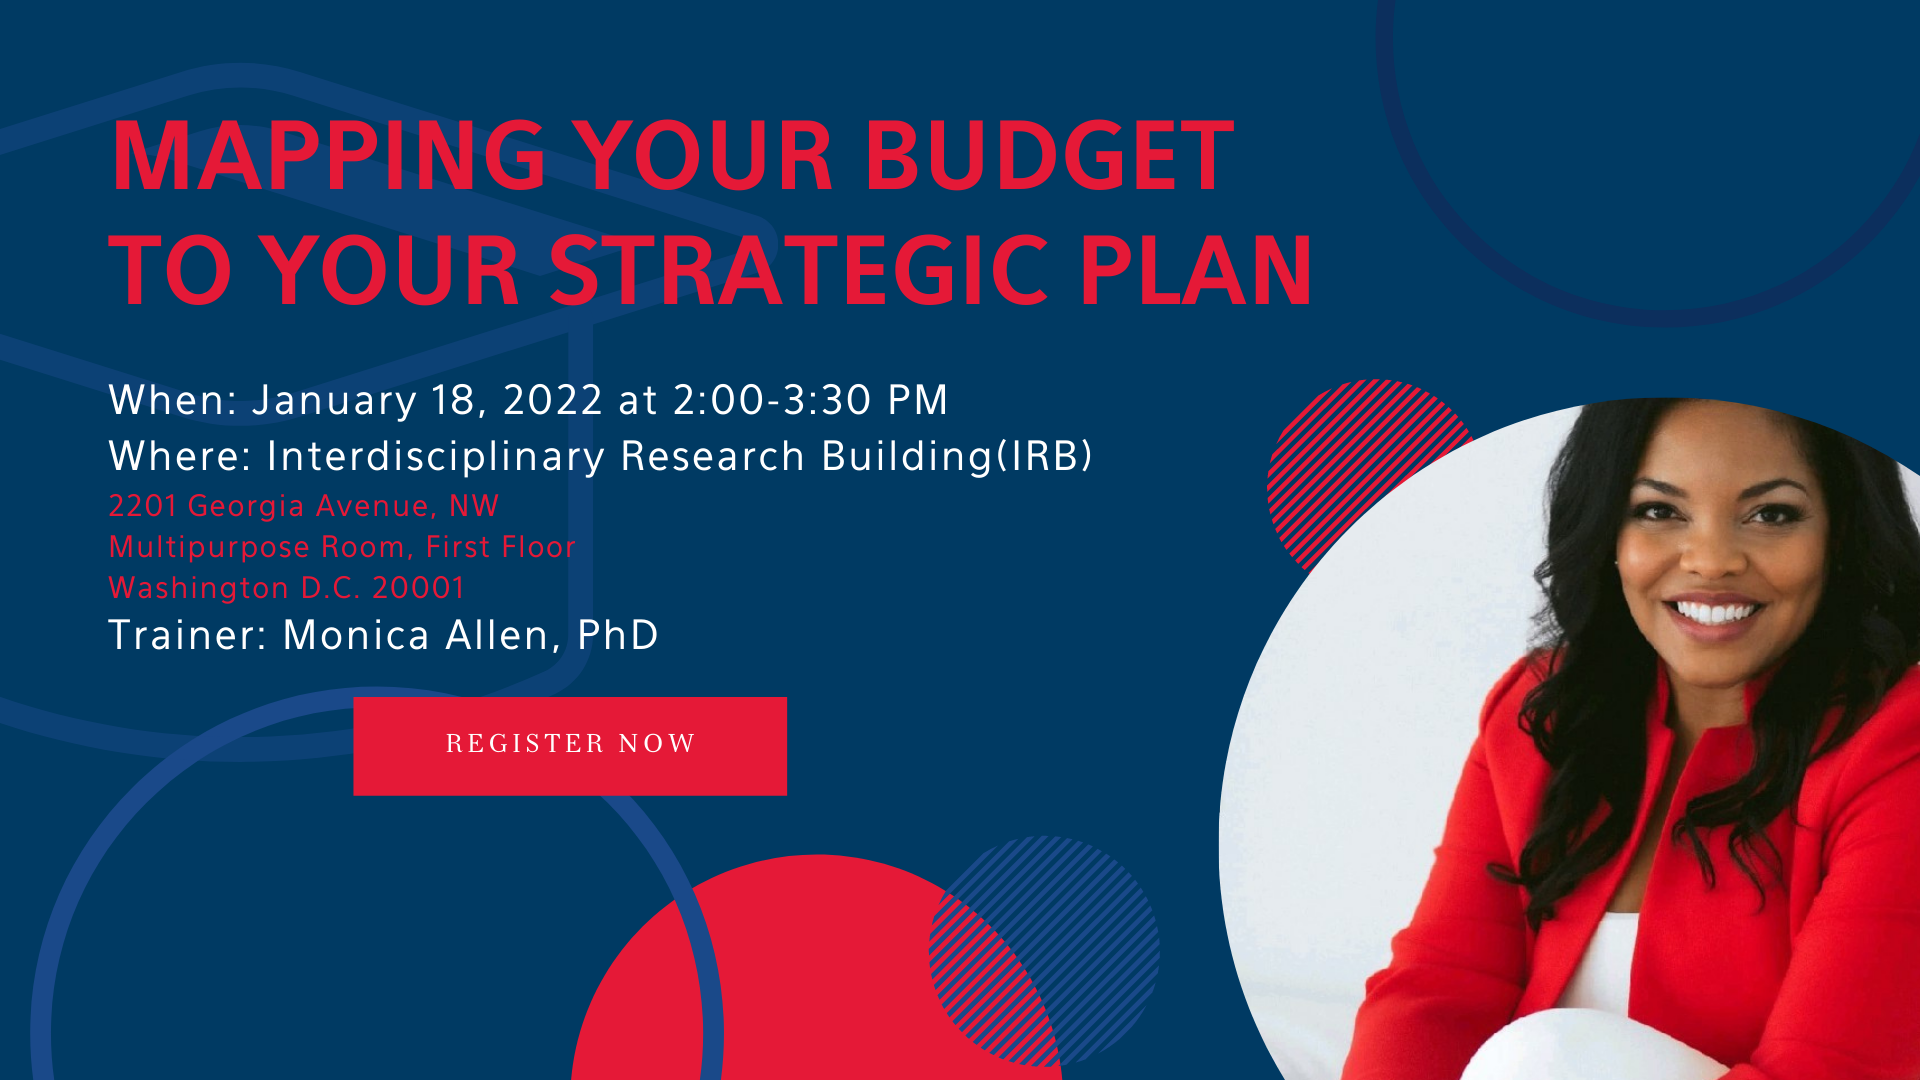 Mapping Your Budget to Your Strategic Plan